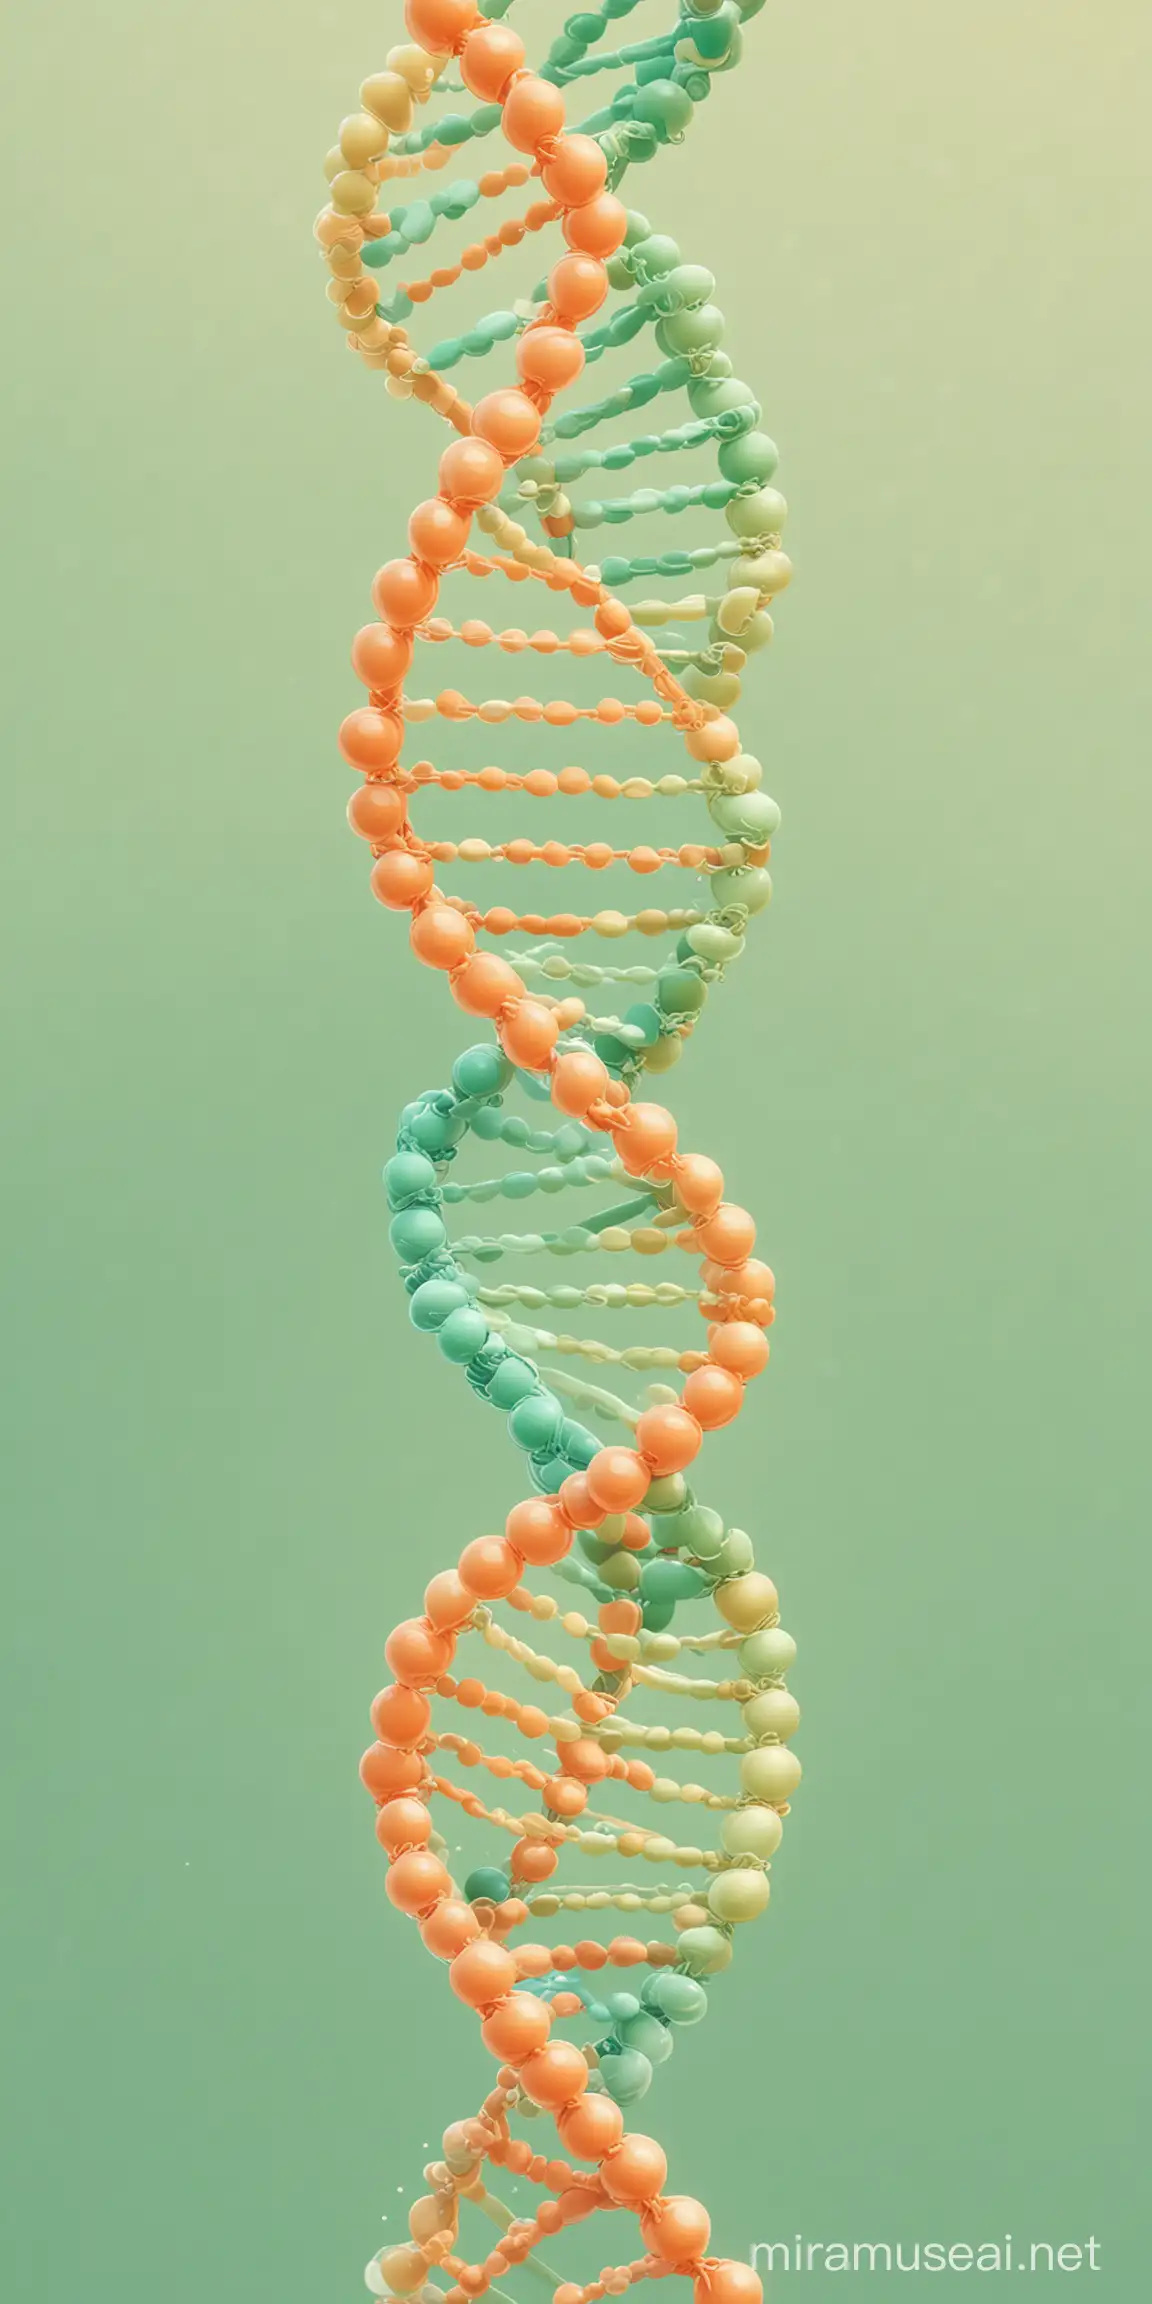 Disneystyle DNA Animation with Pastel Colors in Green and Orange